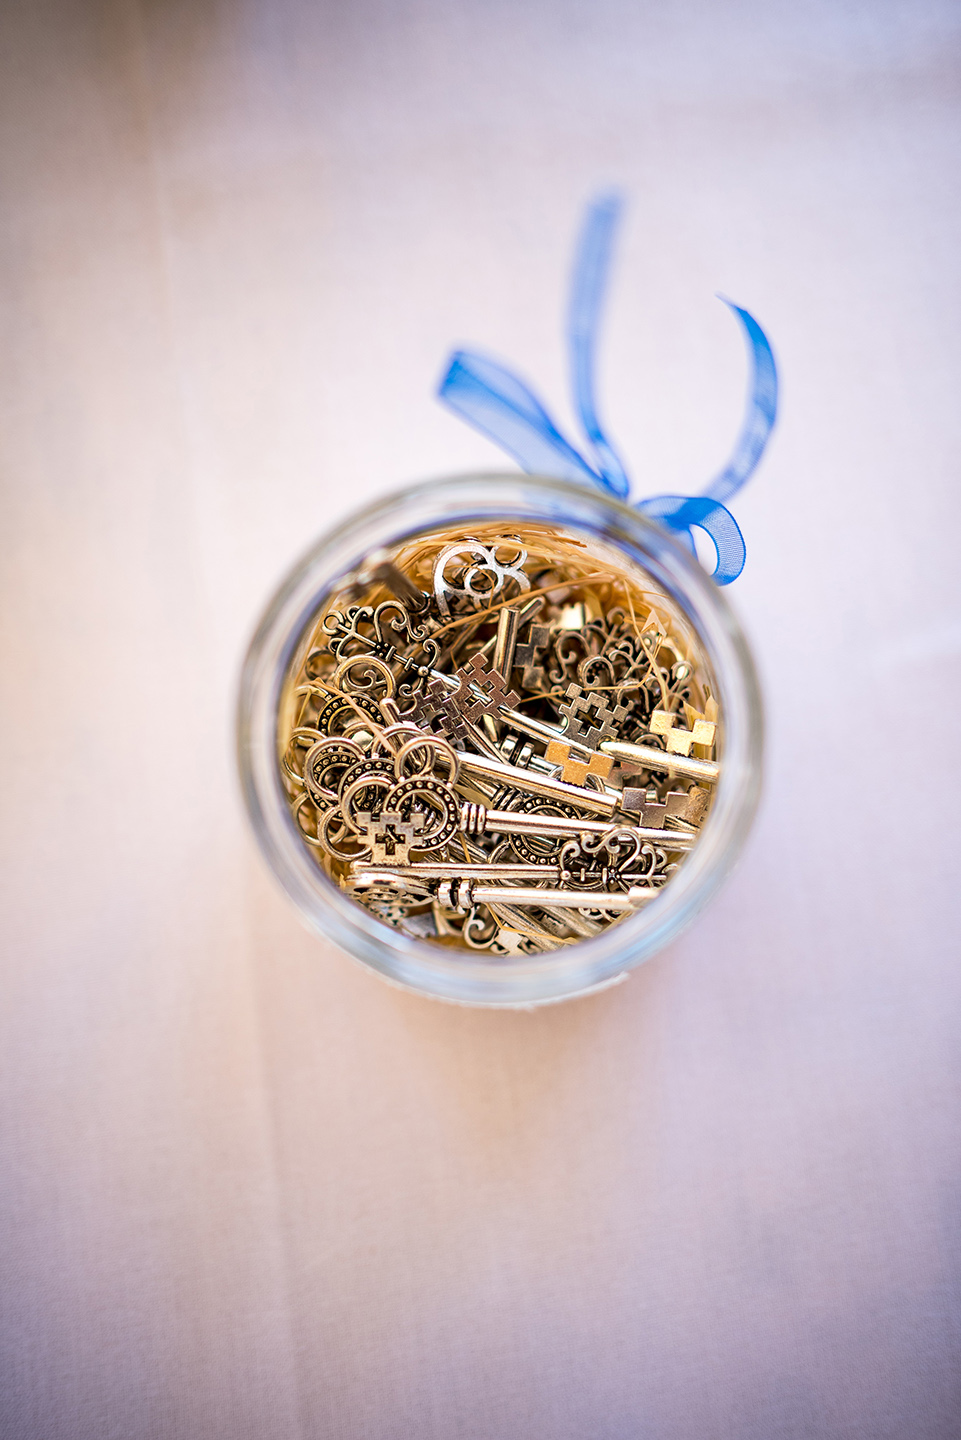 A jar contained personalized engraved keys which were used as wedding favours